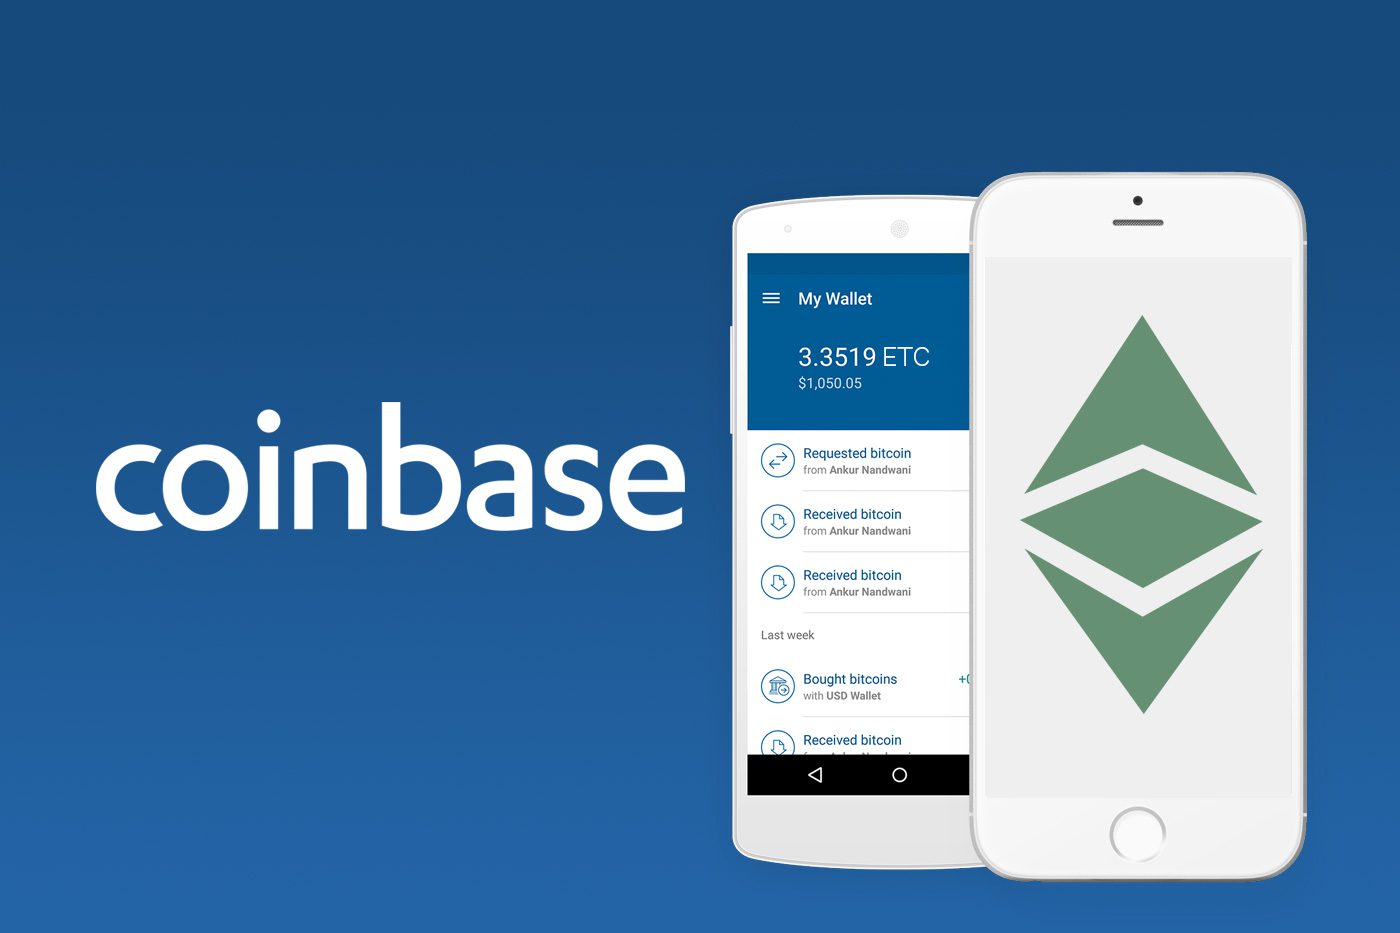 How do I Buy Ethereum In coinbase